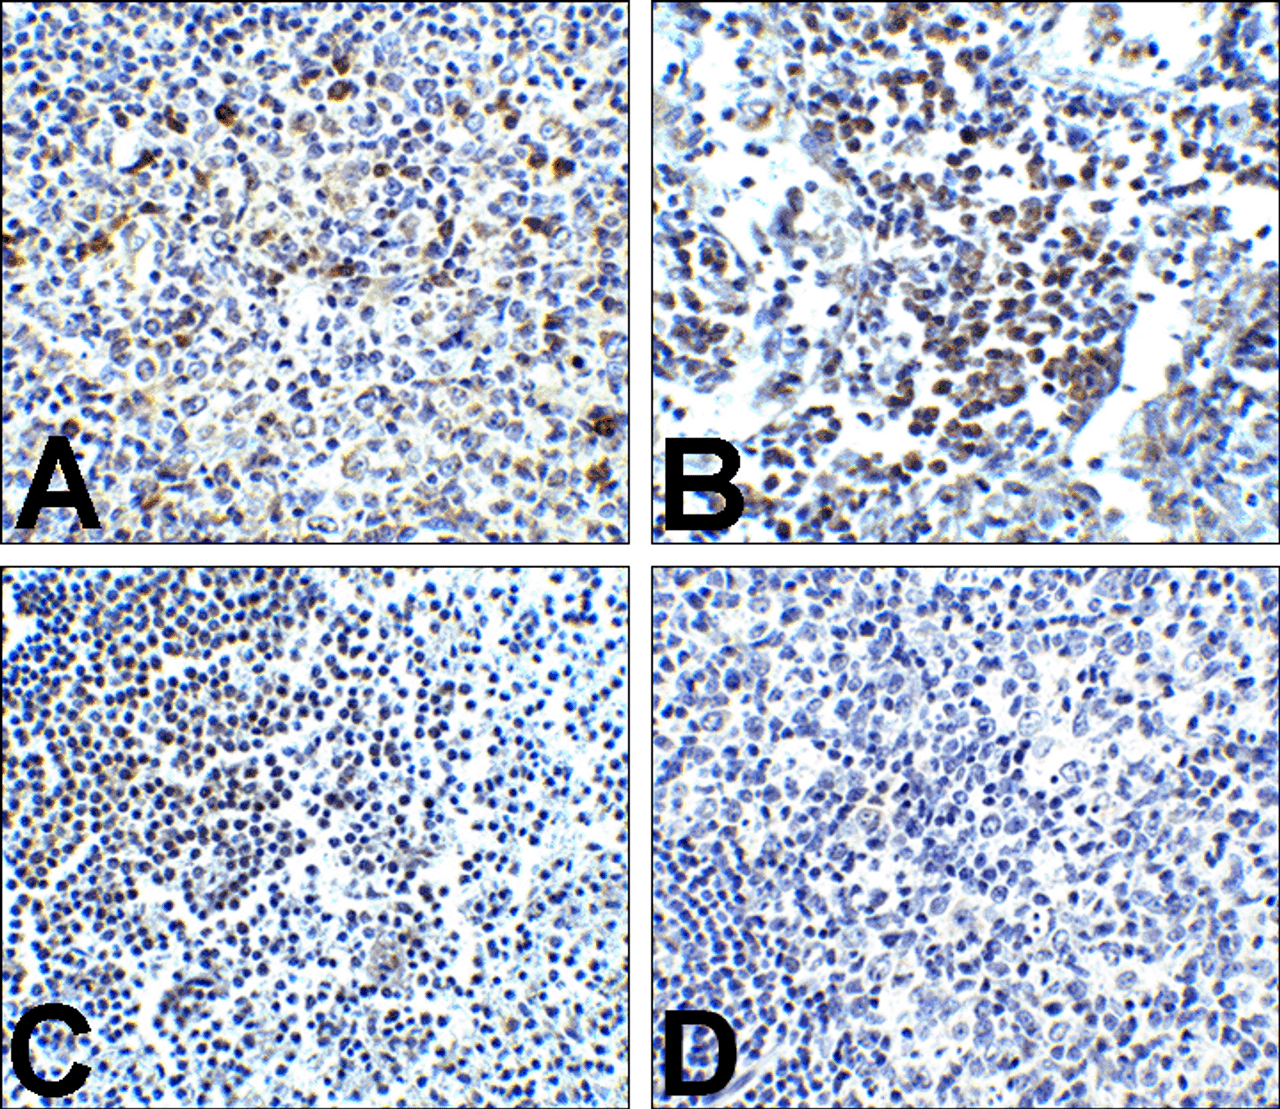 Immunohistochemistry of PD-1 in (A) human tonsil tissue, (B) human lymph node tissue, and (C) human spleen tissue with PD-1 antibody at 5 ug/mL. (D) Immunohistochemistry in human tonsil tissue with control mouse IgG staining at 5 ug/mL.